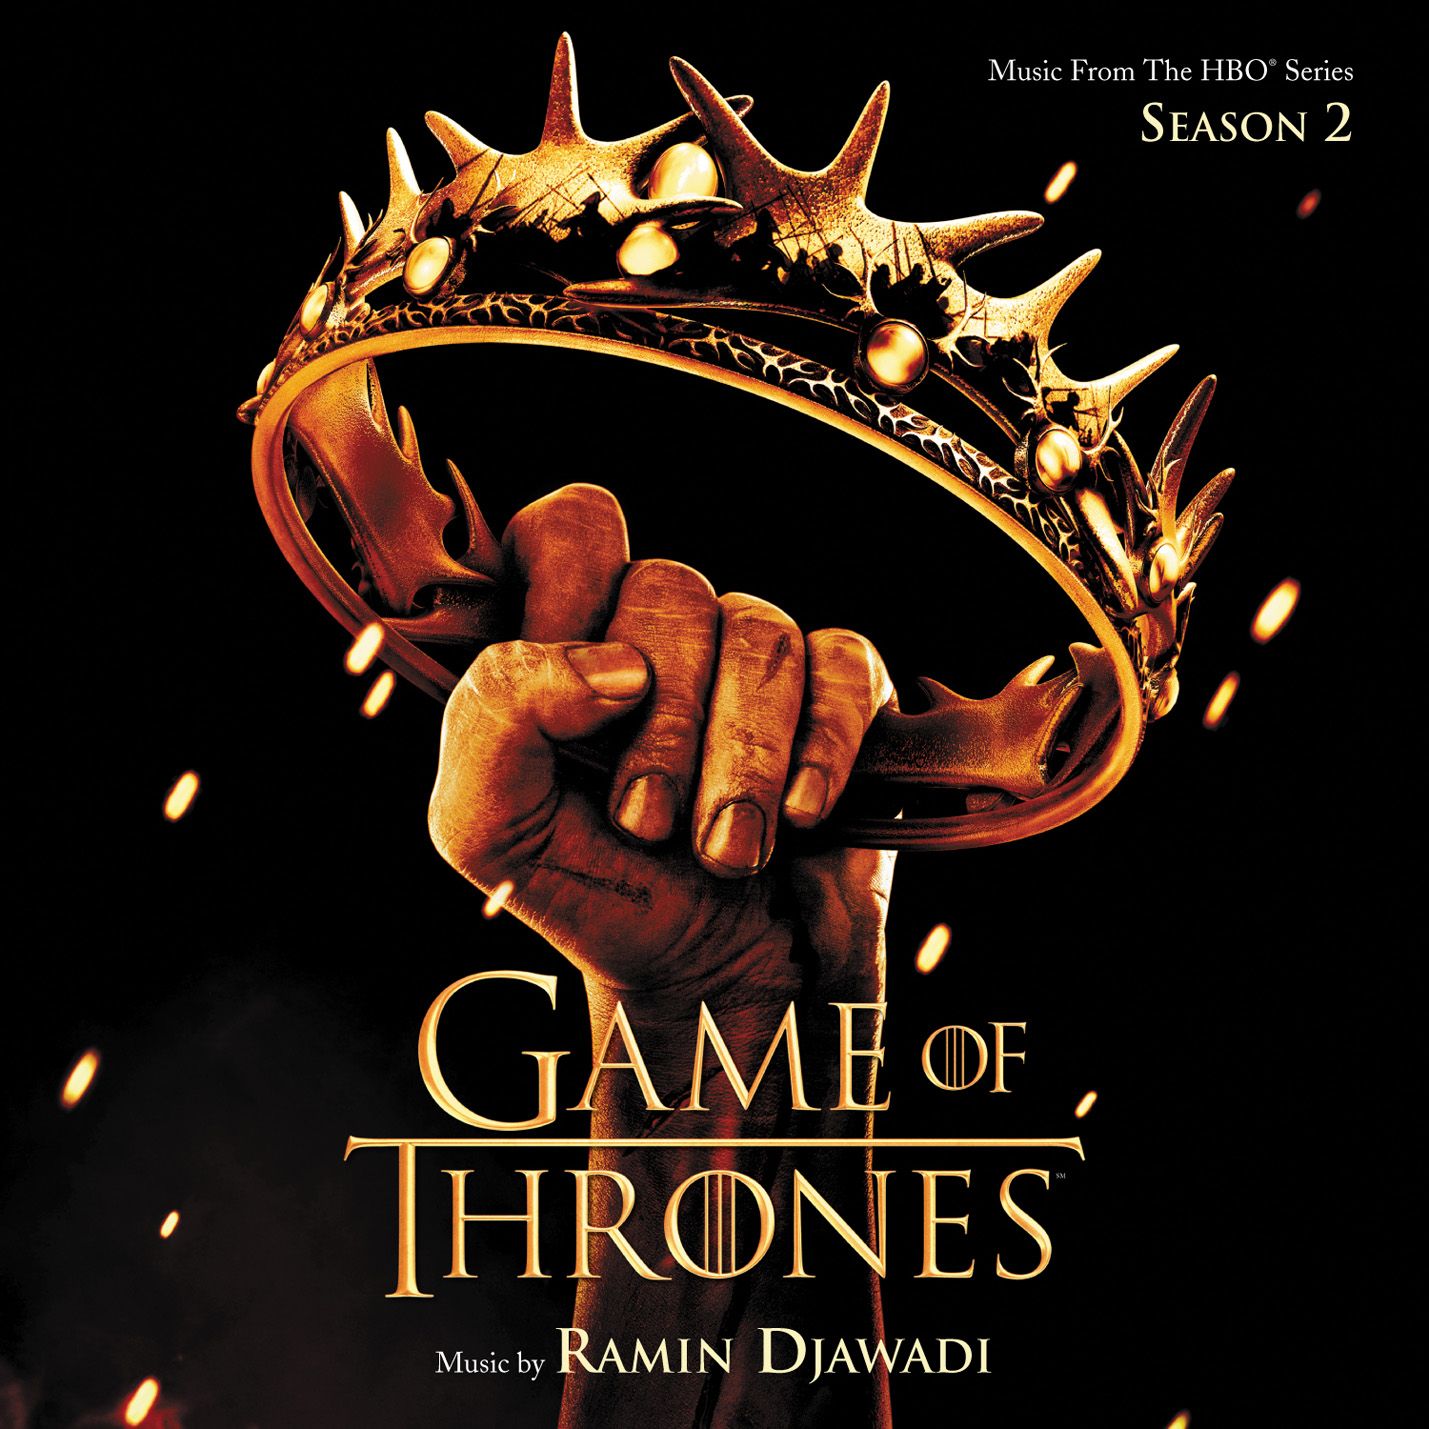 Game of Thrones: A Telltale Games Series, Wiki of Westeros